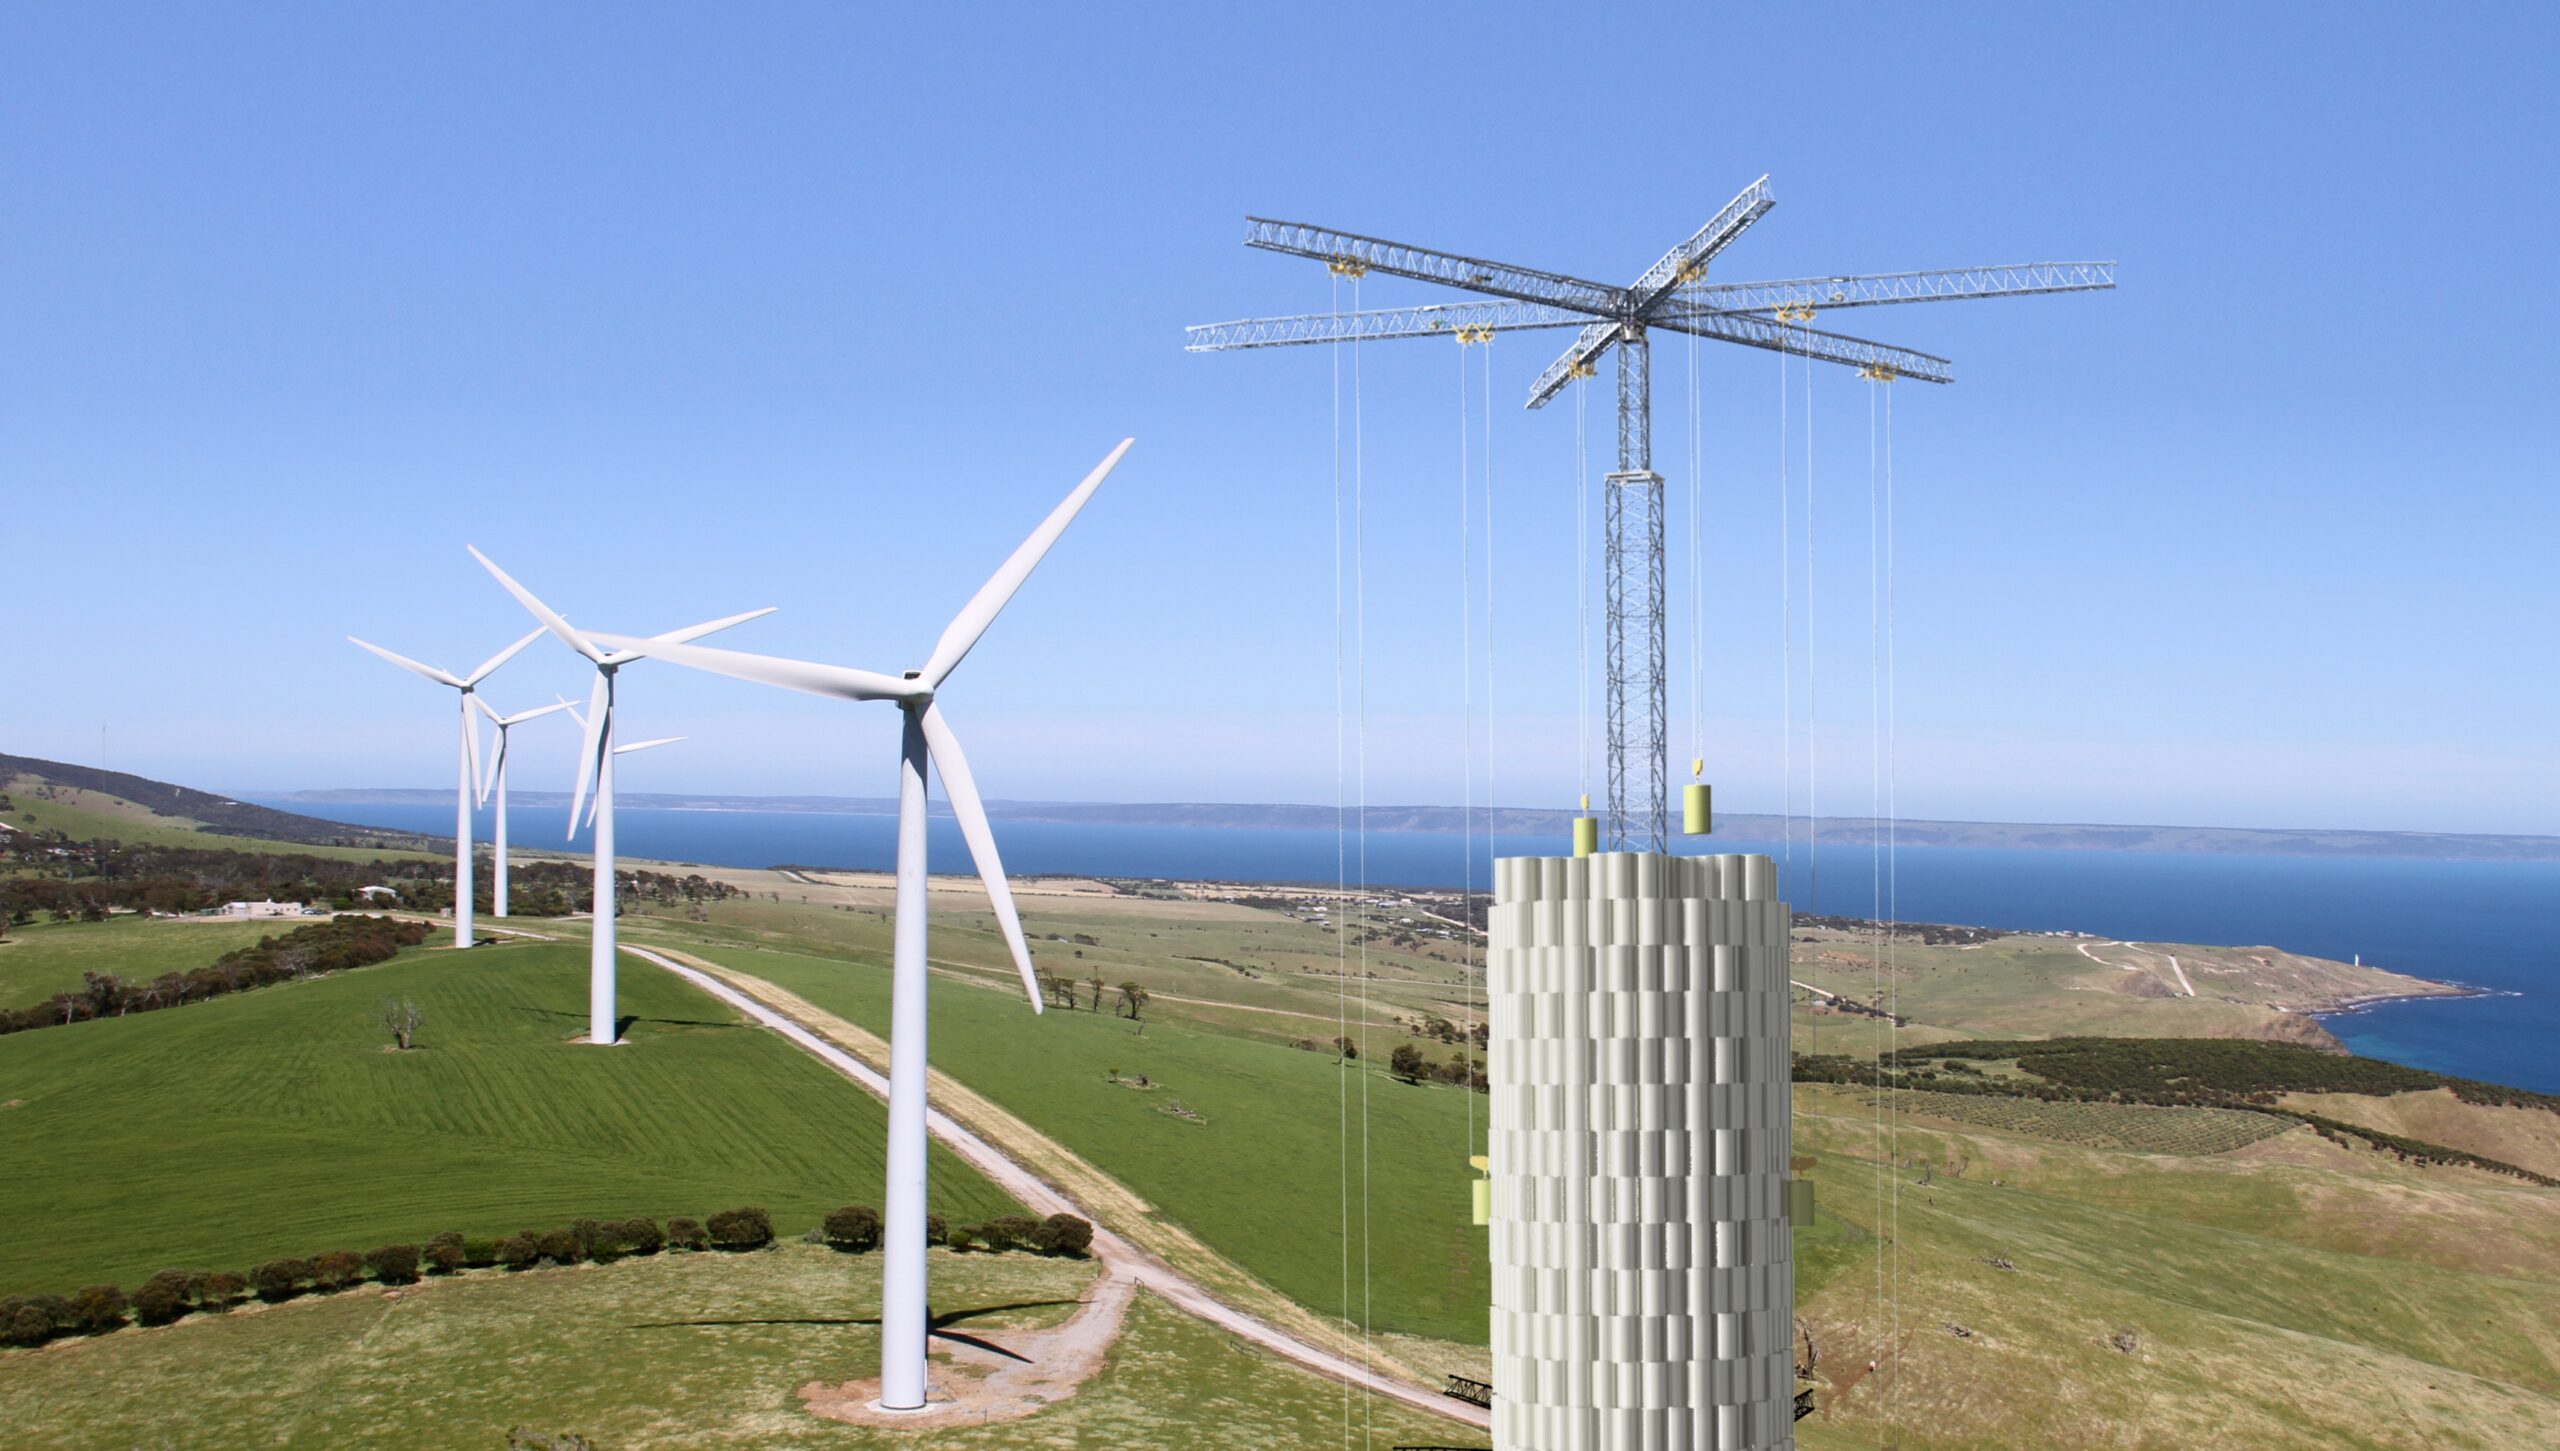 https://www.power-technology.com/wp-content/uploads/sites/21/2019/03/Energy-Vault-storage-tower-co-located-with-wind-farm-scaled.jpeg